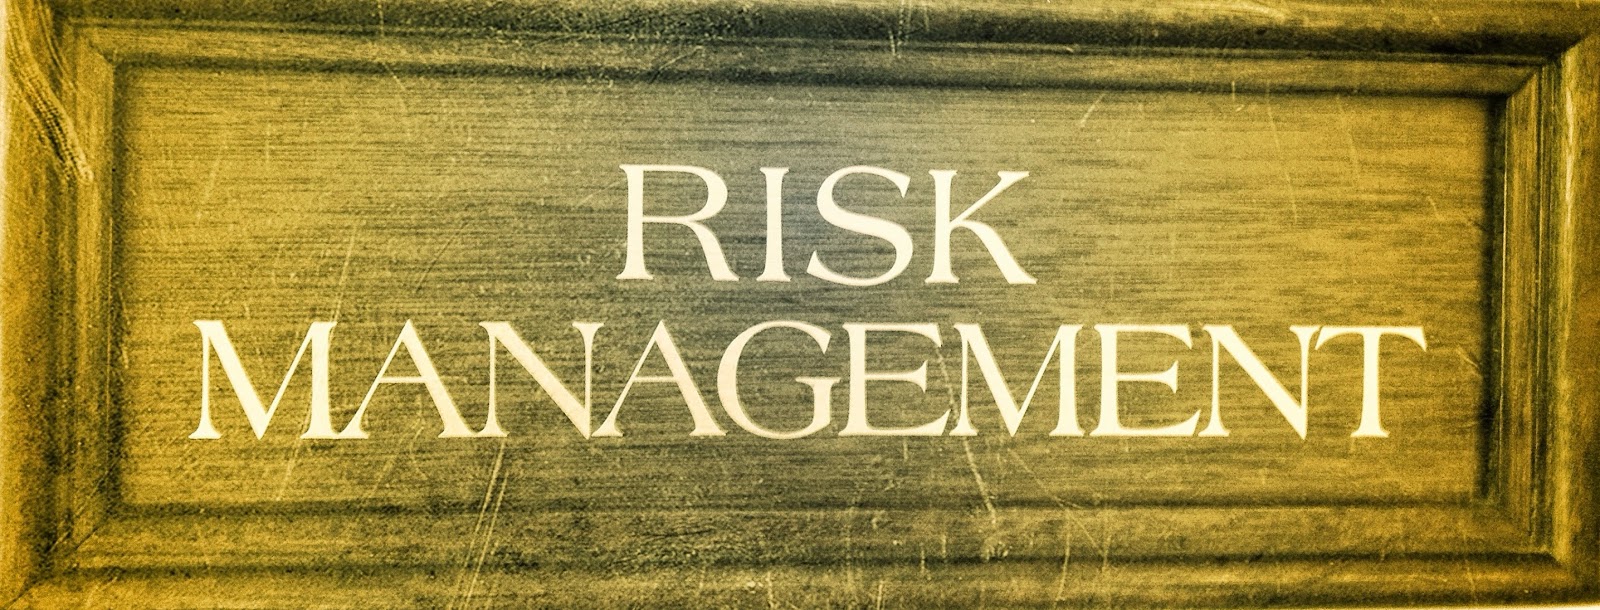 stock options and managerial incentives for risk taking